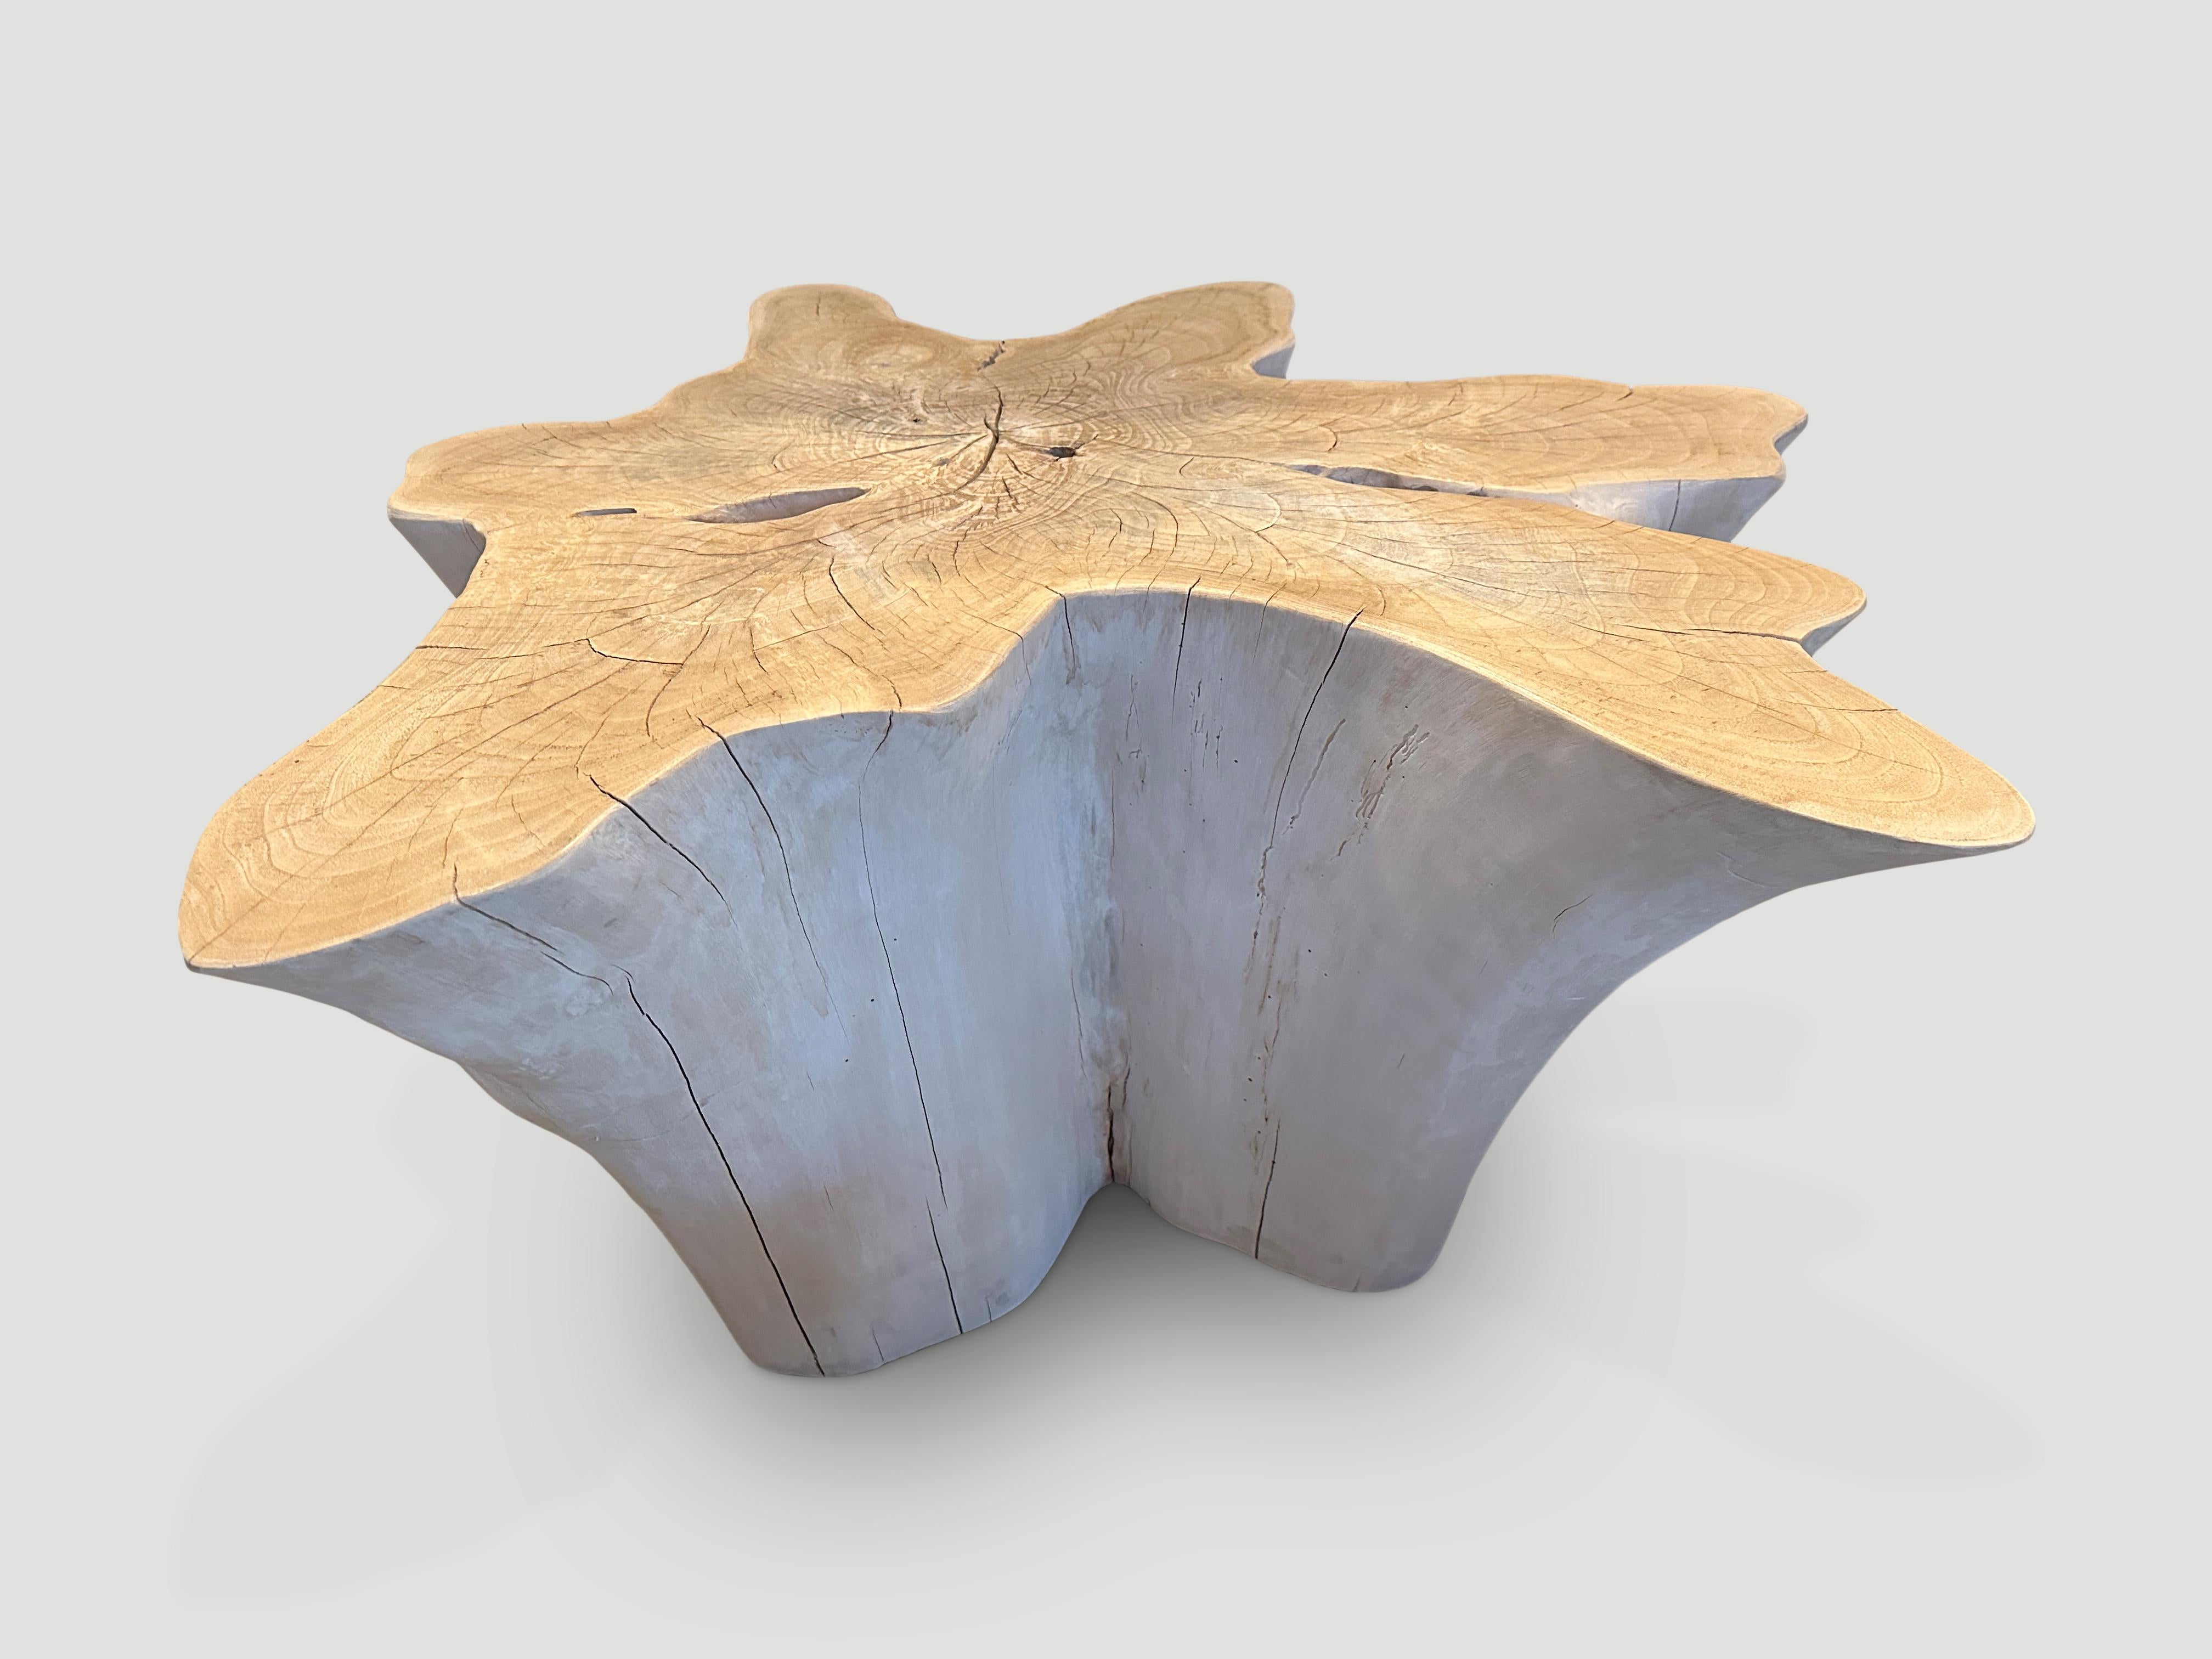 Impressive reclaimed bleached teak amorphous coffee table. A slight graduation from the bottom to the top. We have added a polish to the top for a slight bone contrast and protection. 

The St. Barts Collection features an exciting new line of